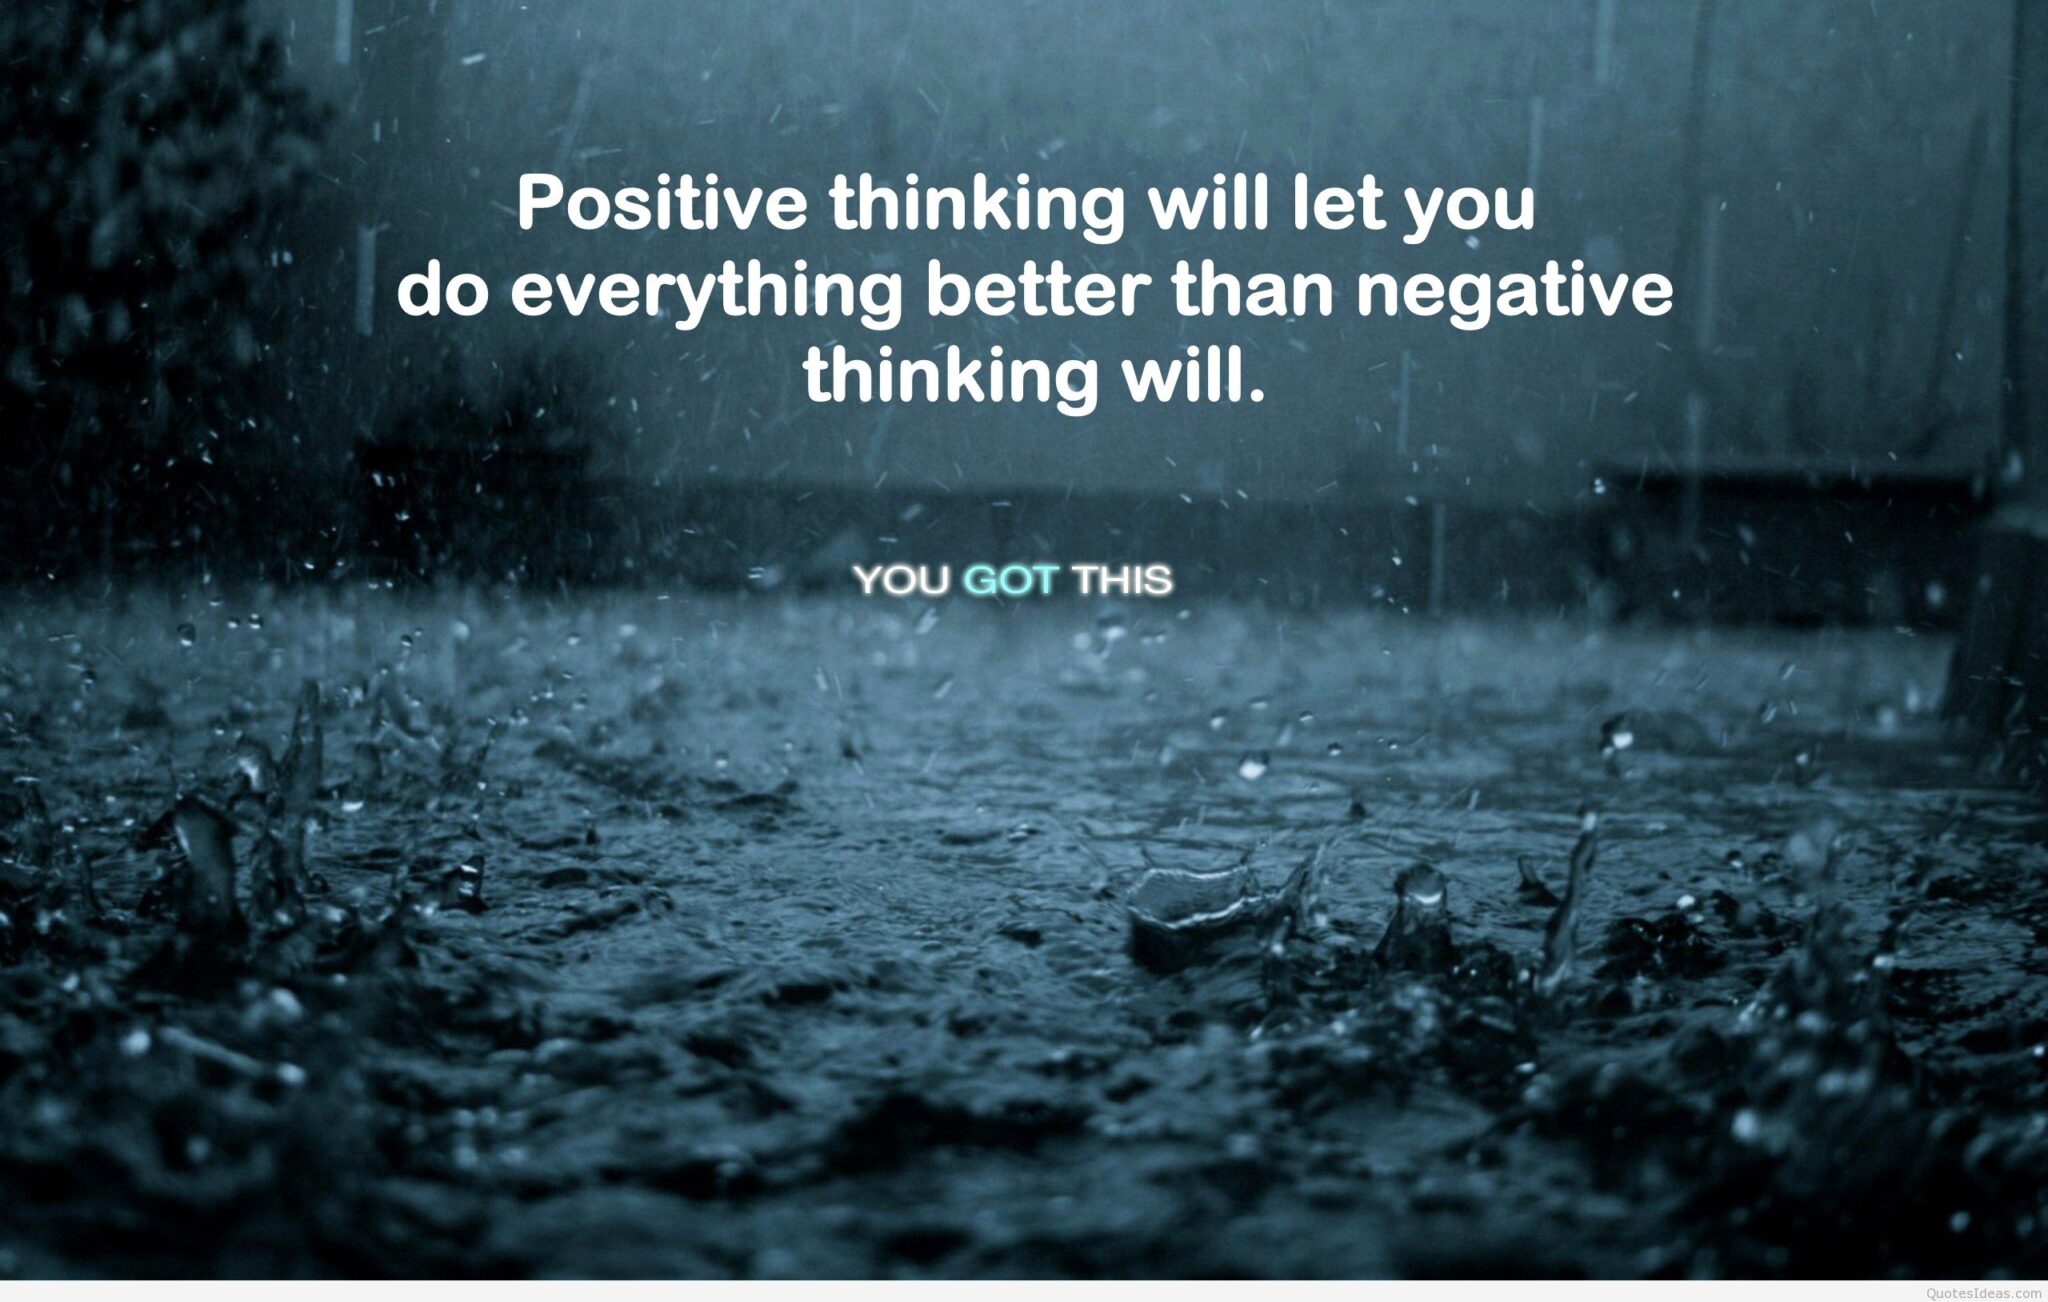 Motivational Wallpaper On Positive Thinking | Dont Give Up World